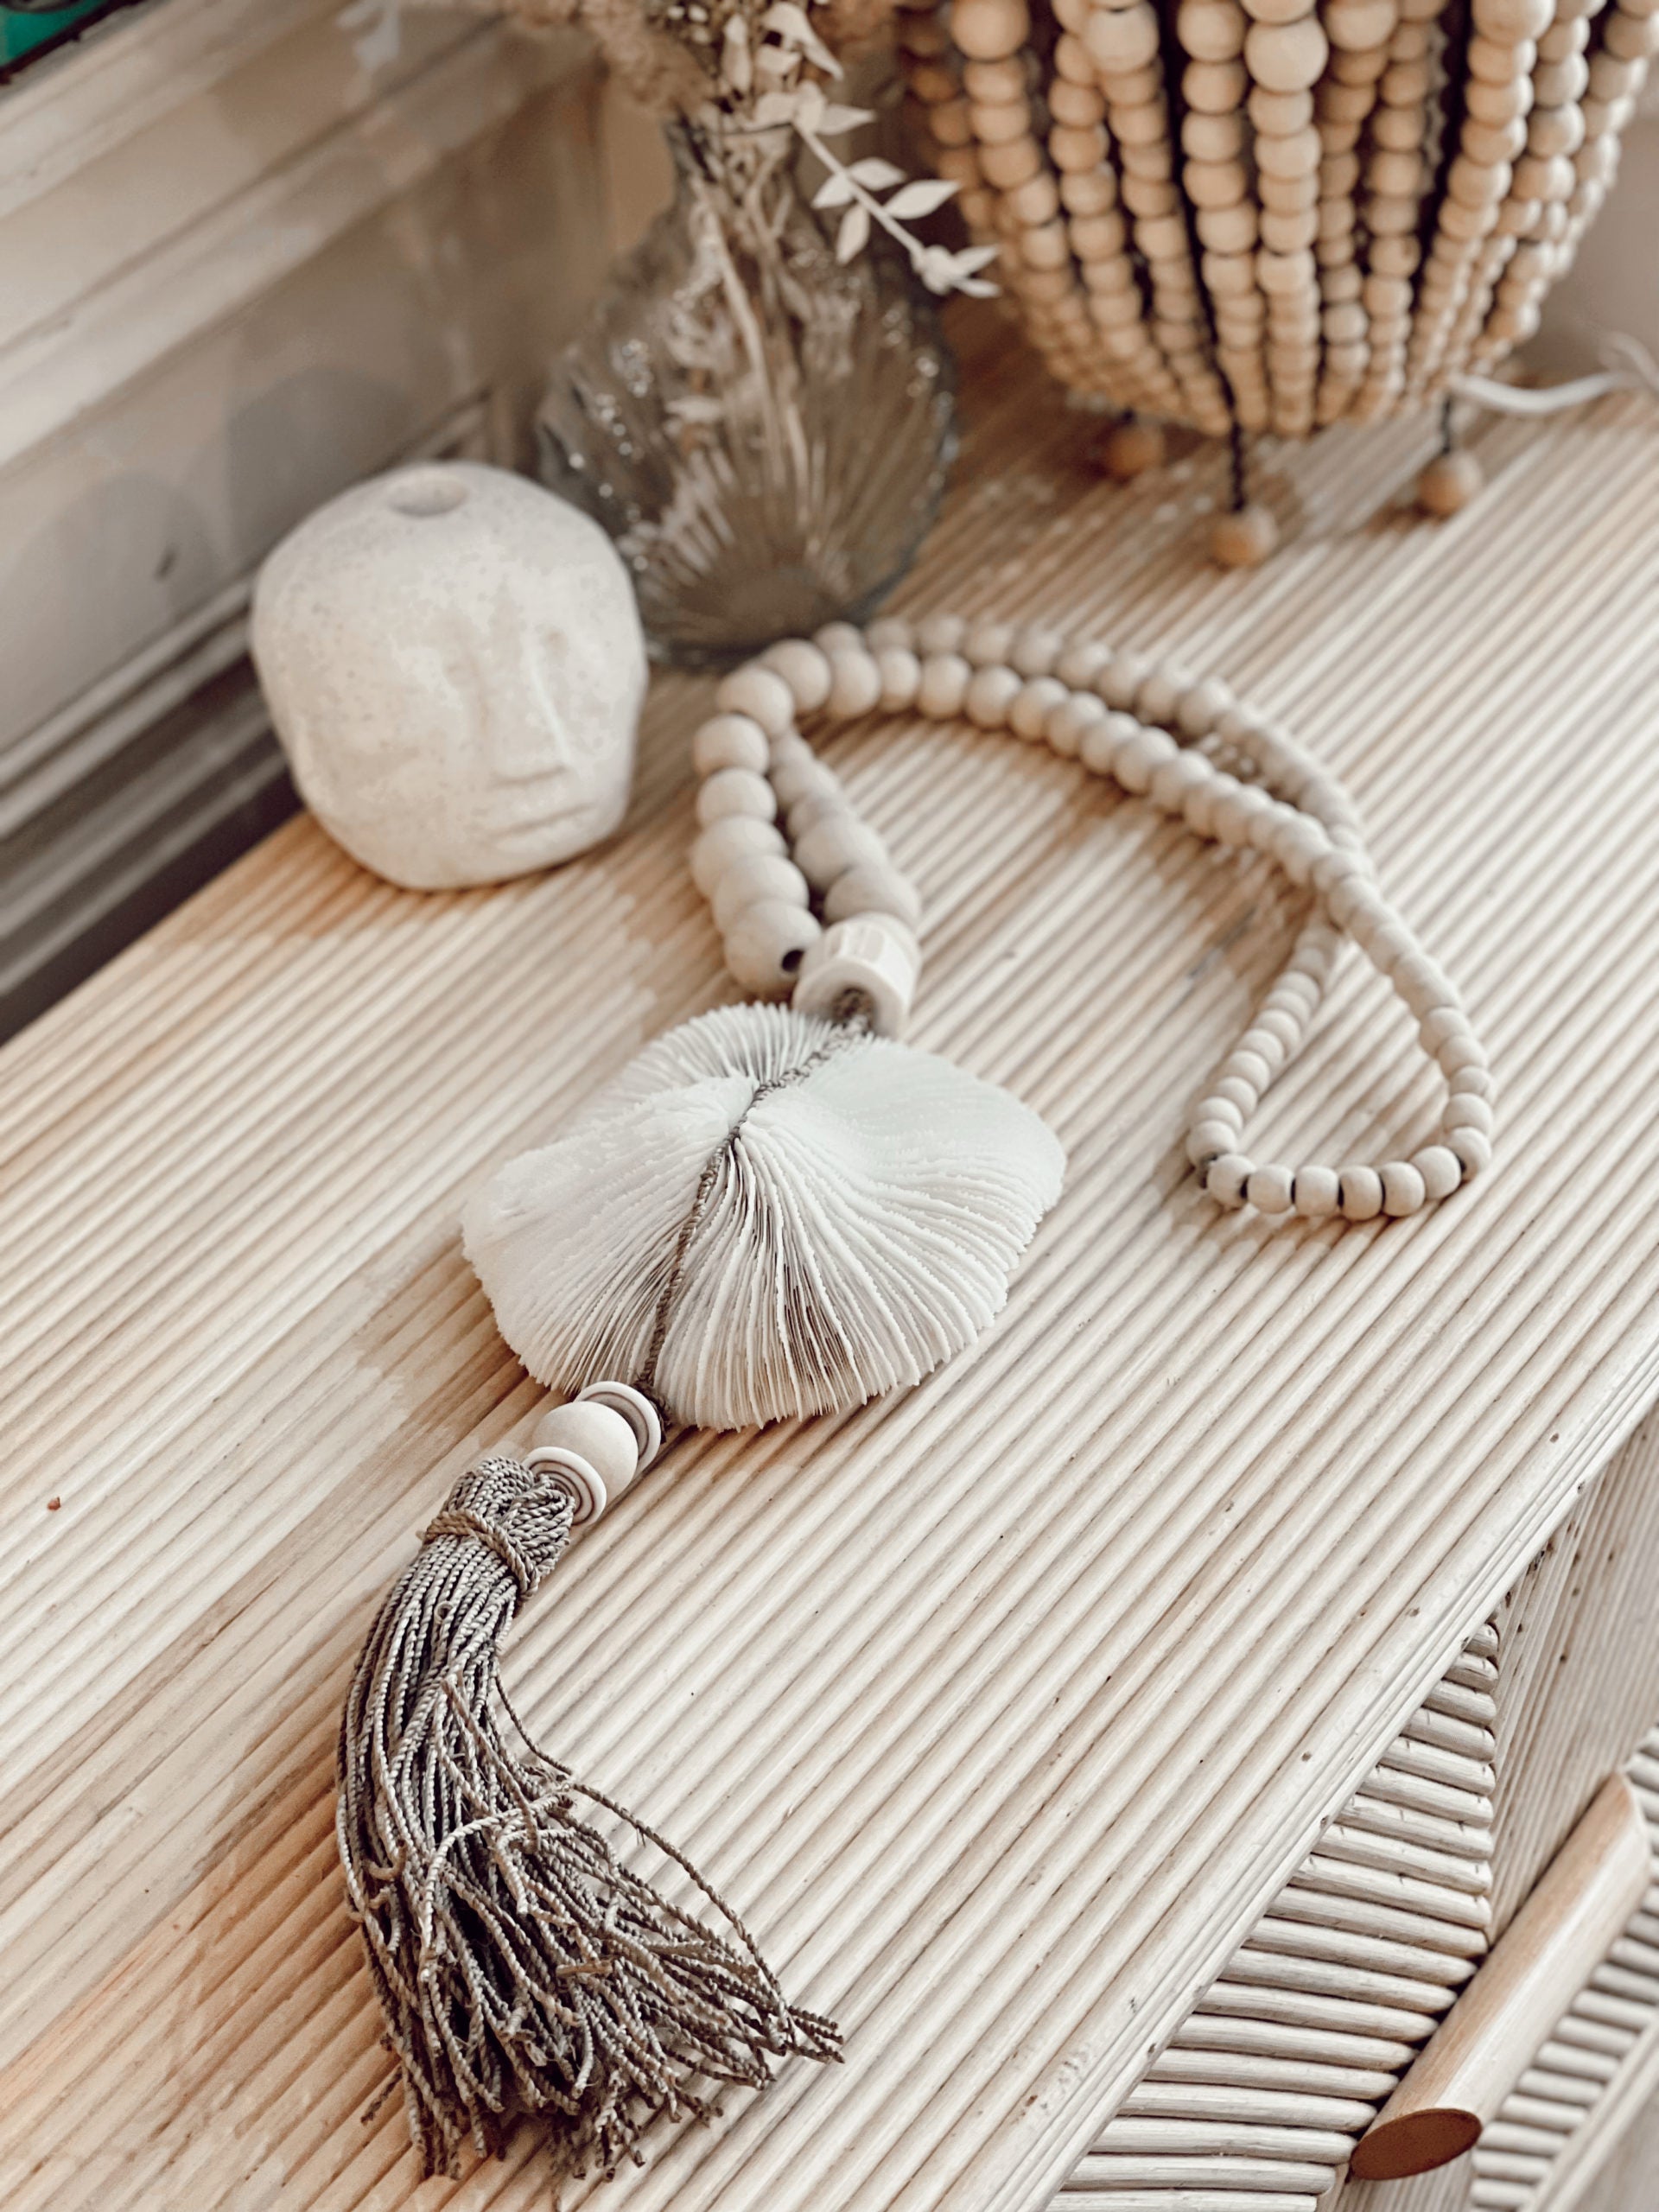 Coral and rope suspension